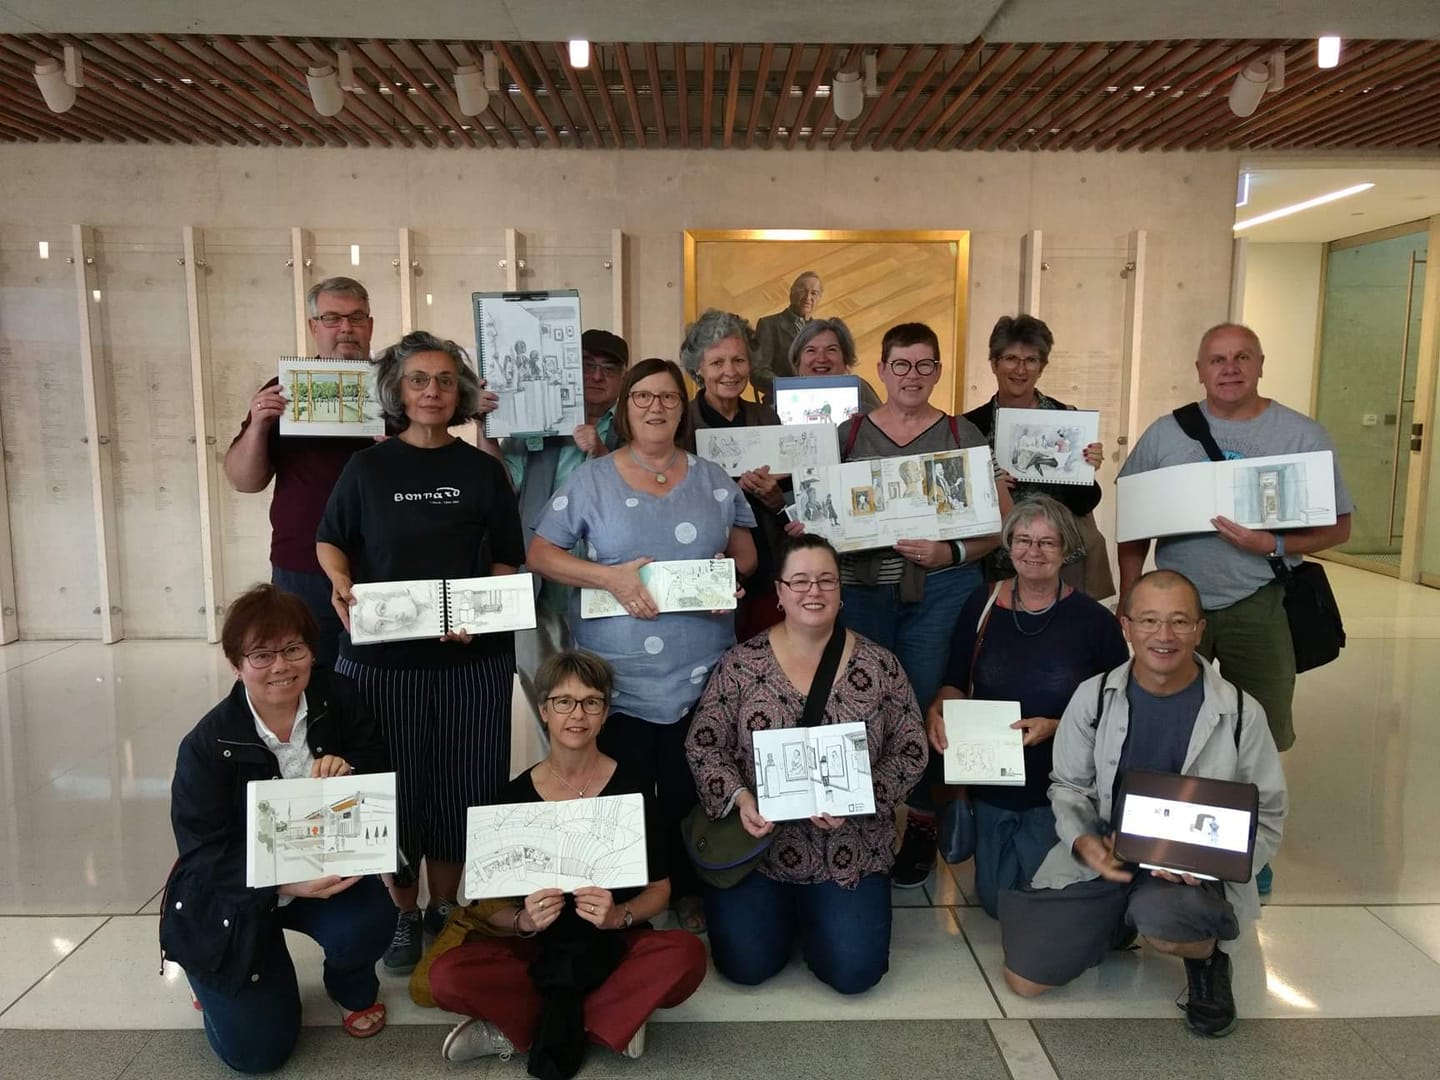 Canberra's 'Urban Sketchers' preserving a record of the city